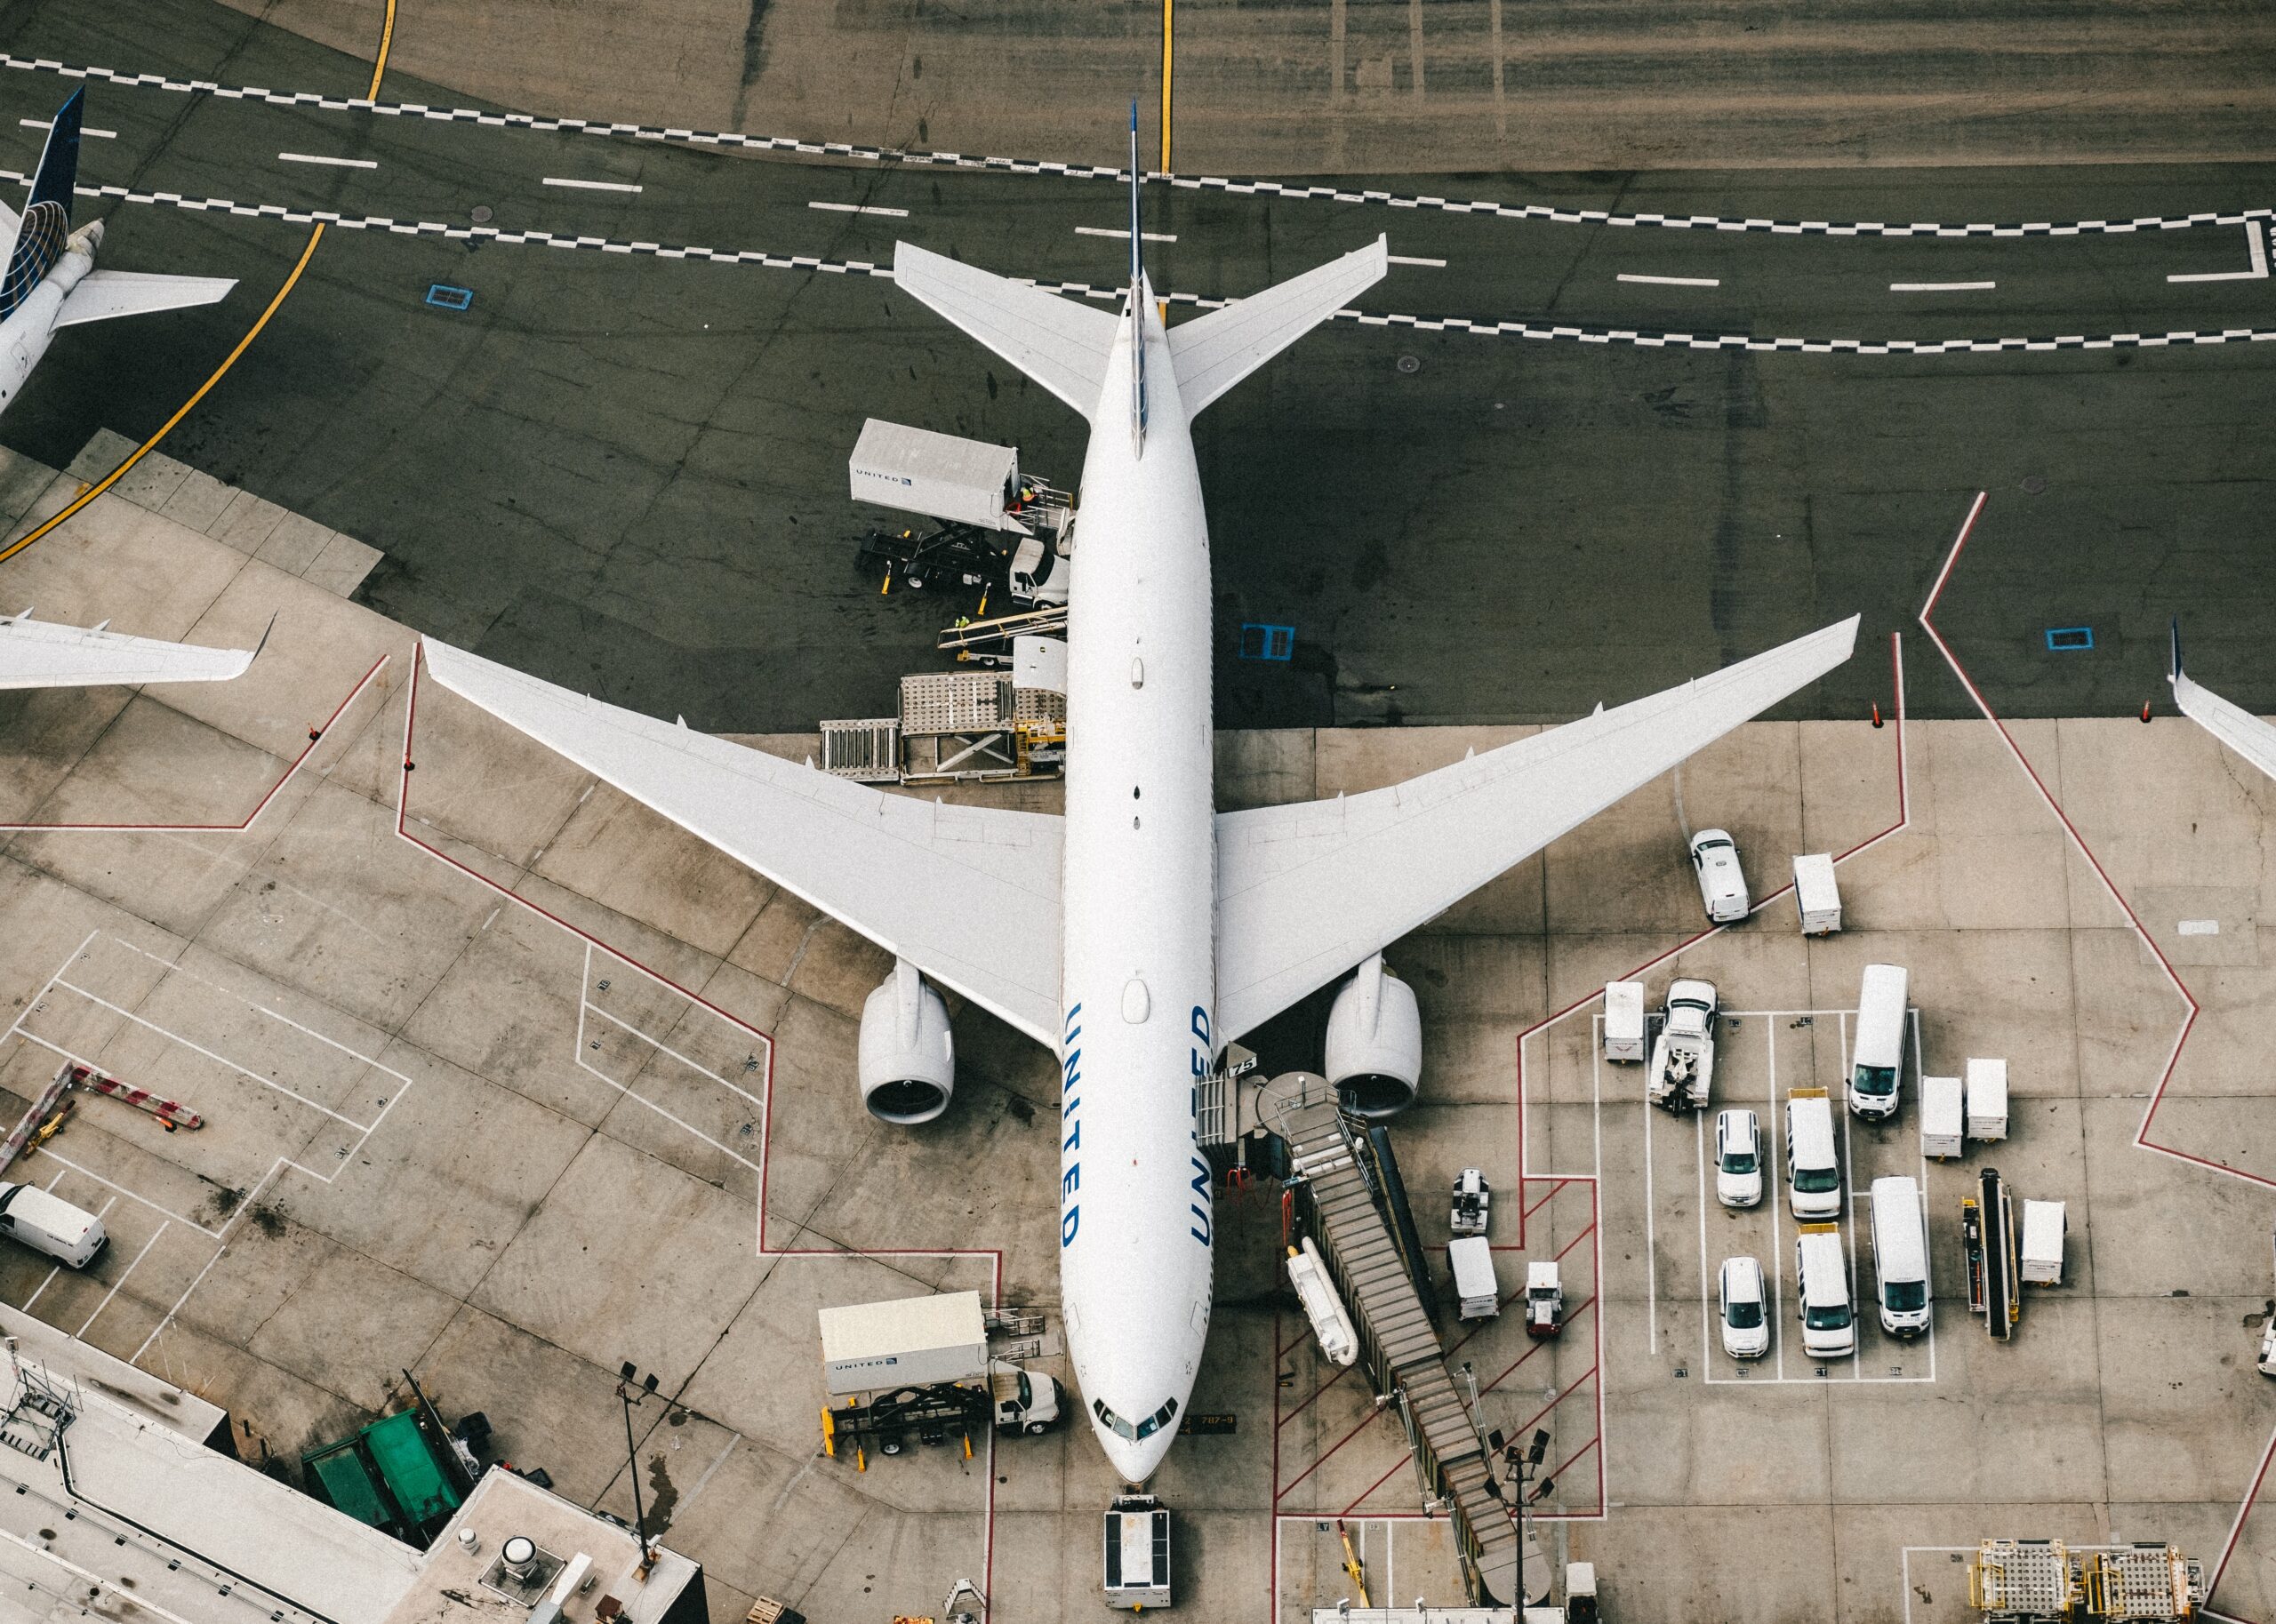 Aerial view of an aeroplane being loaded on the tarmac